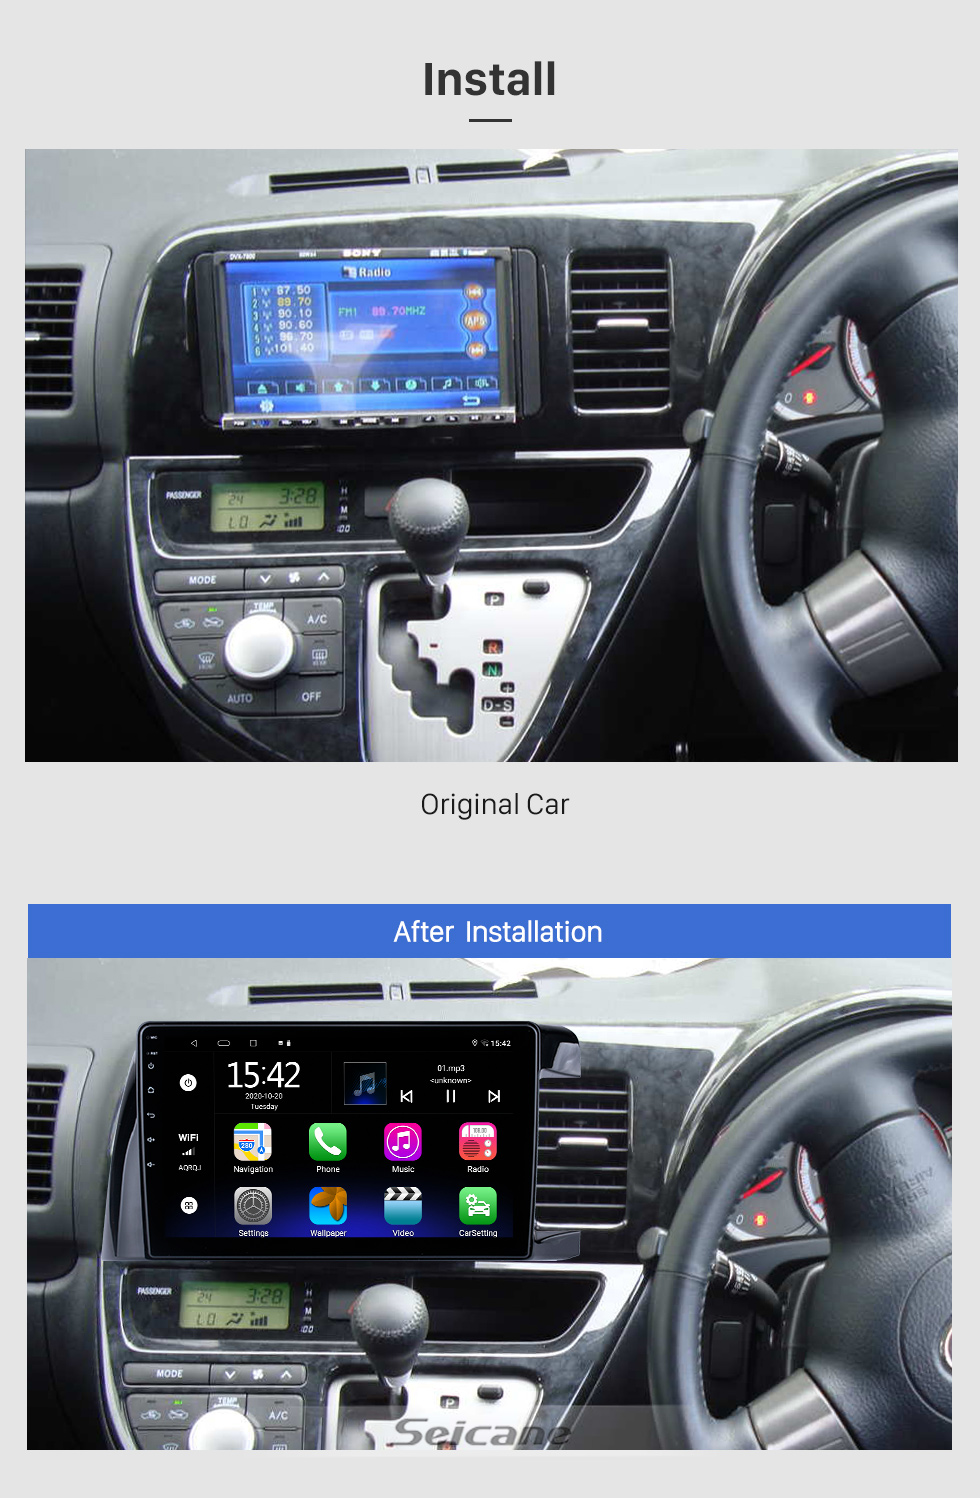 Seicane 10.1 inch Full Touchscreen 2003 Toyota WISH RHD Android 10.0 GPS Navigation System With Radio Rearview Camera 3G WiFi Bluetooth Mirror Link OBD2 DVR Steering wheel control 